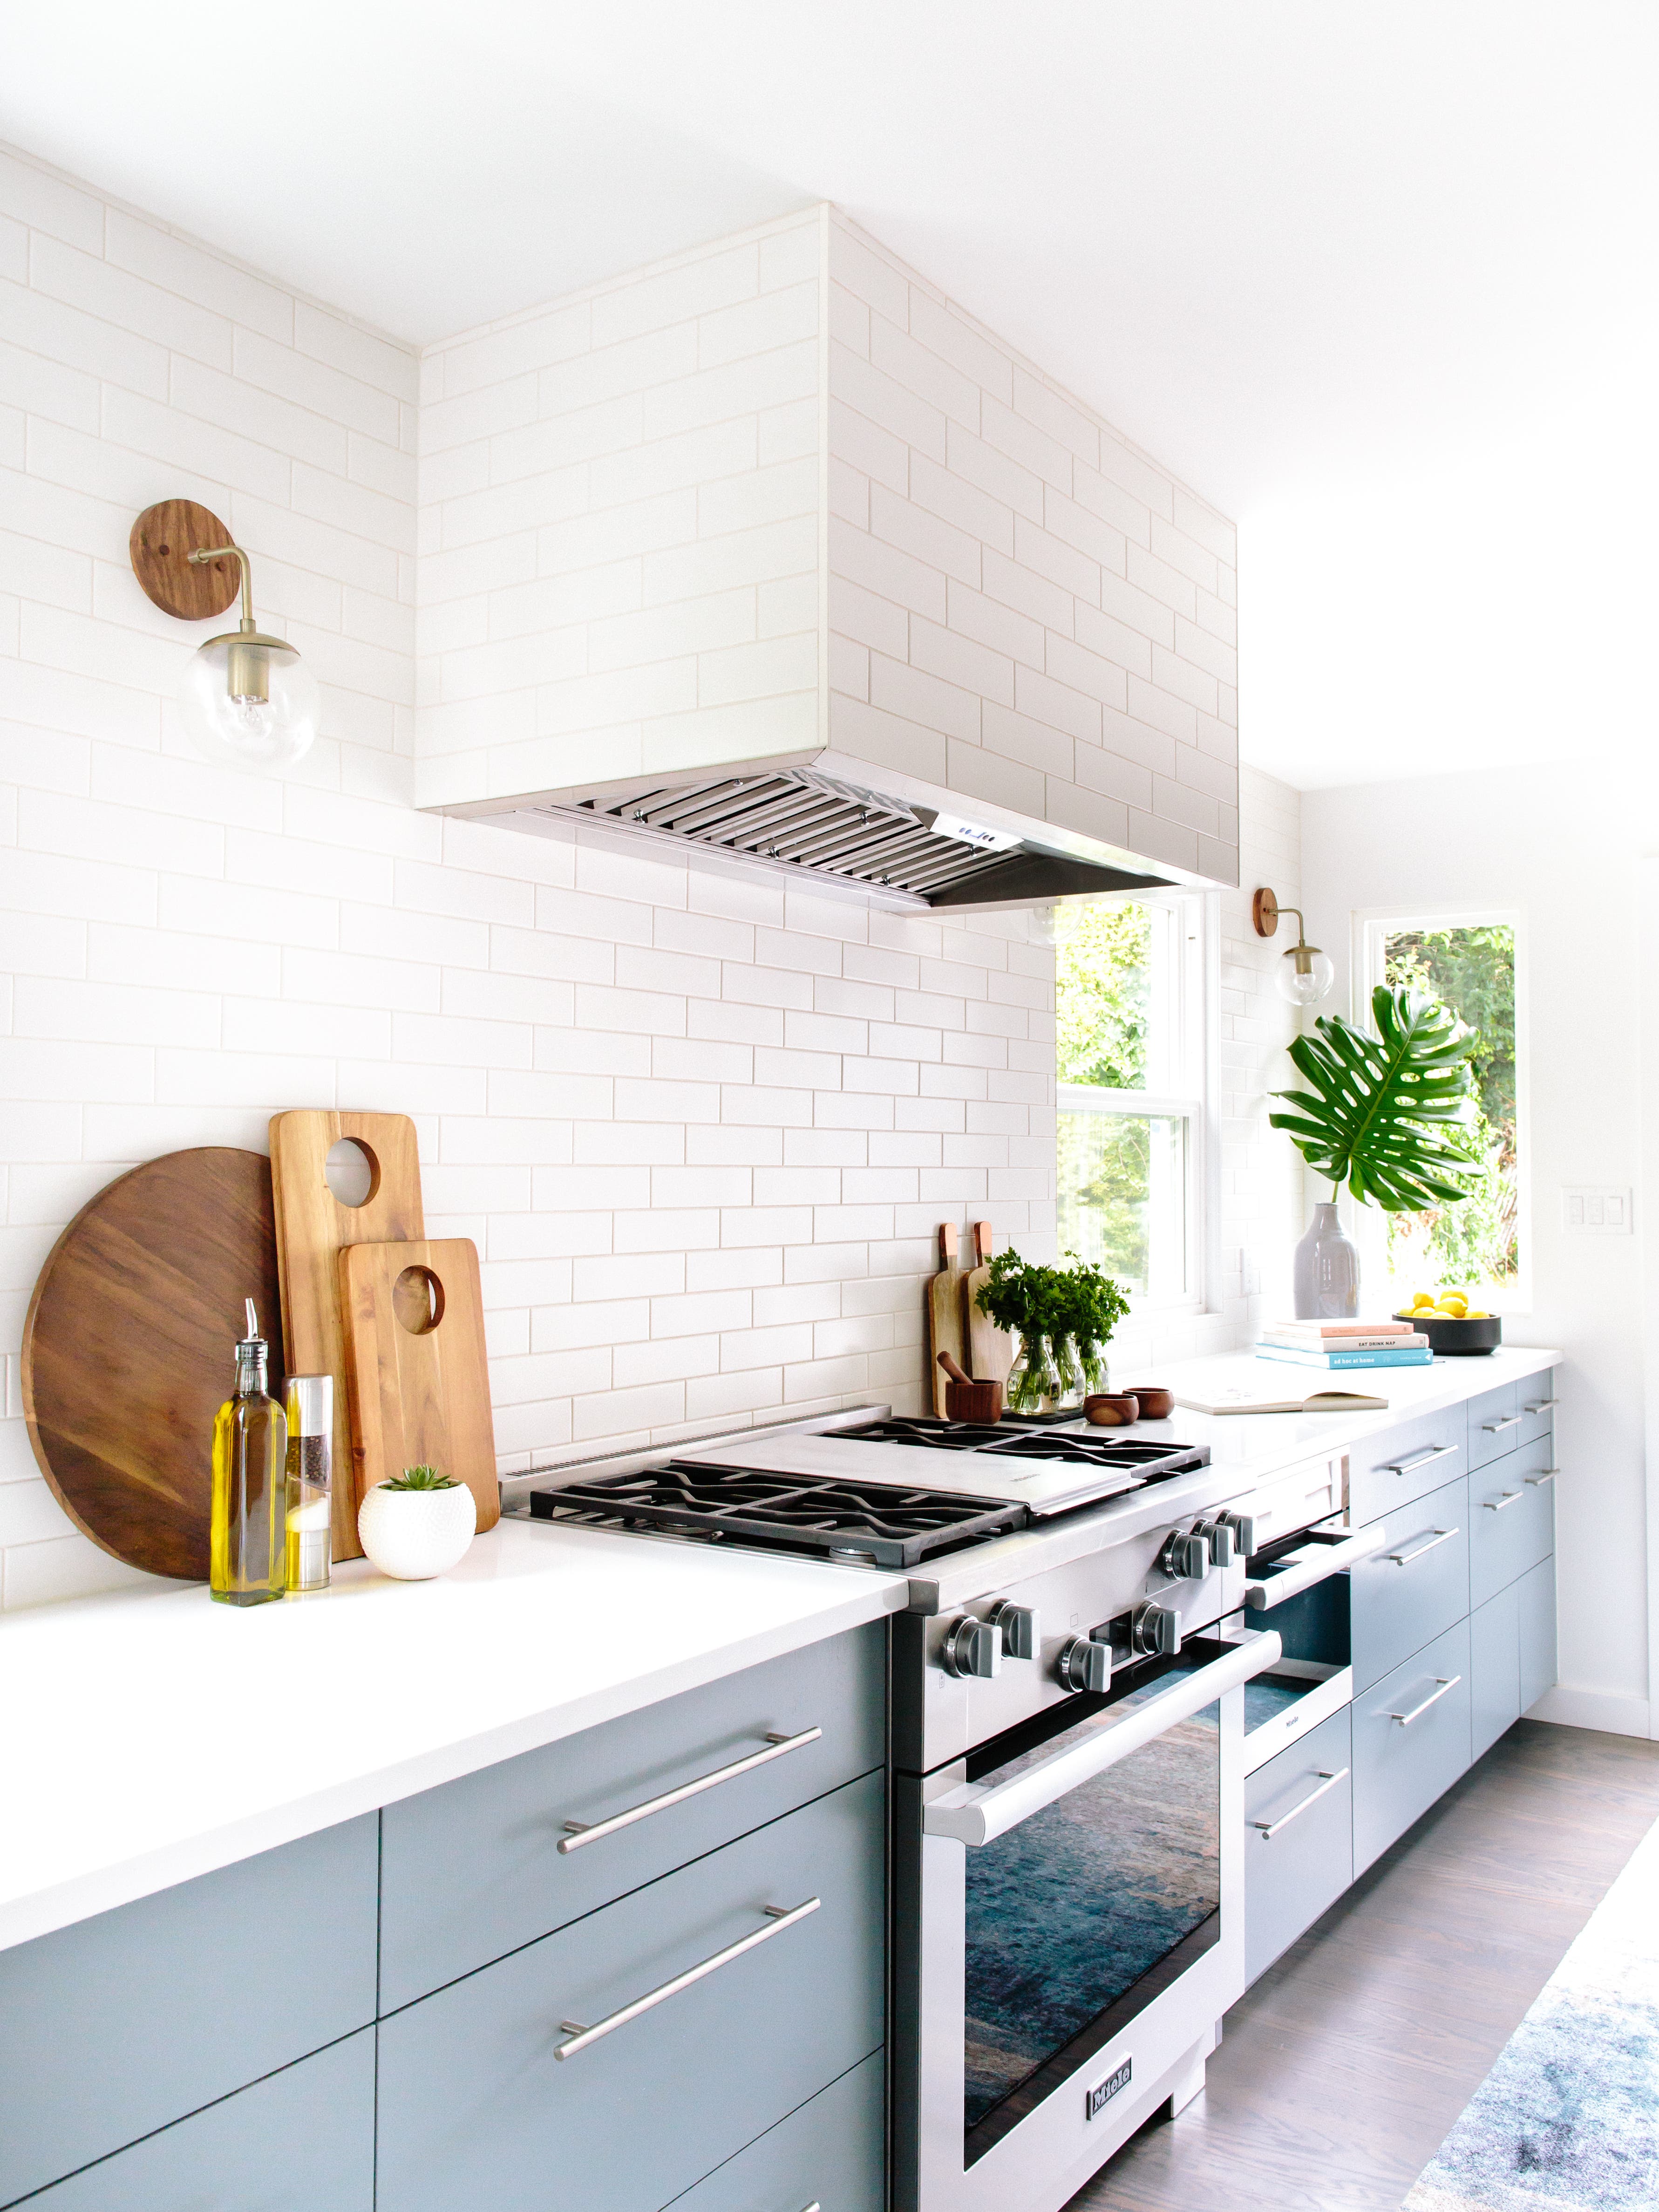 Tour A Kitchen That Hadn’t Been Updated Since the 60s